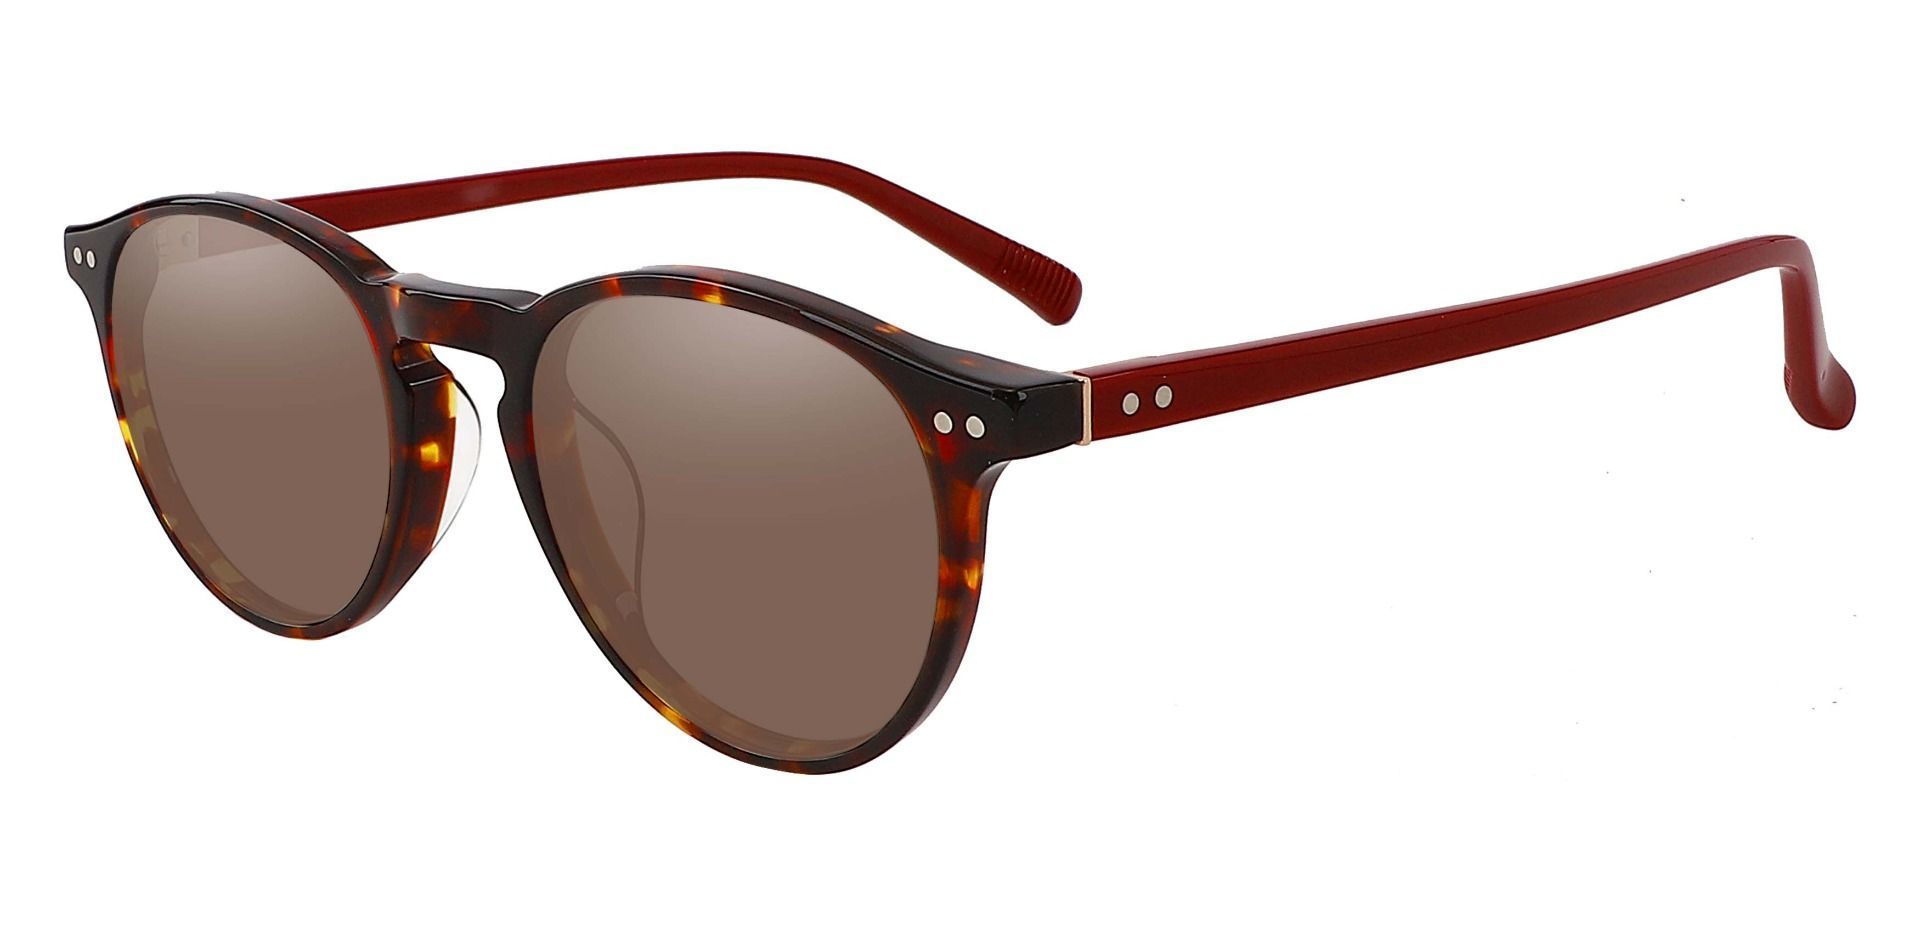 Monarch Oval Lined Bifocal Sunglasses - Tortoise Frame With Brown Lenses